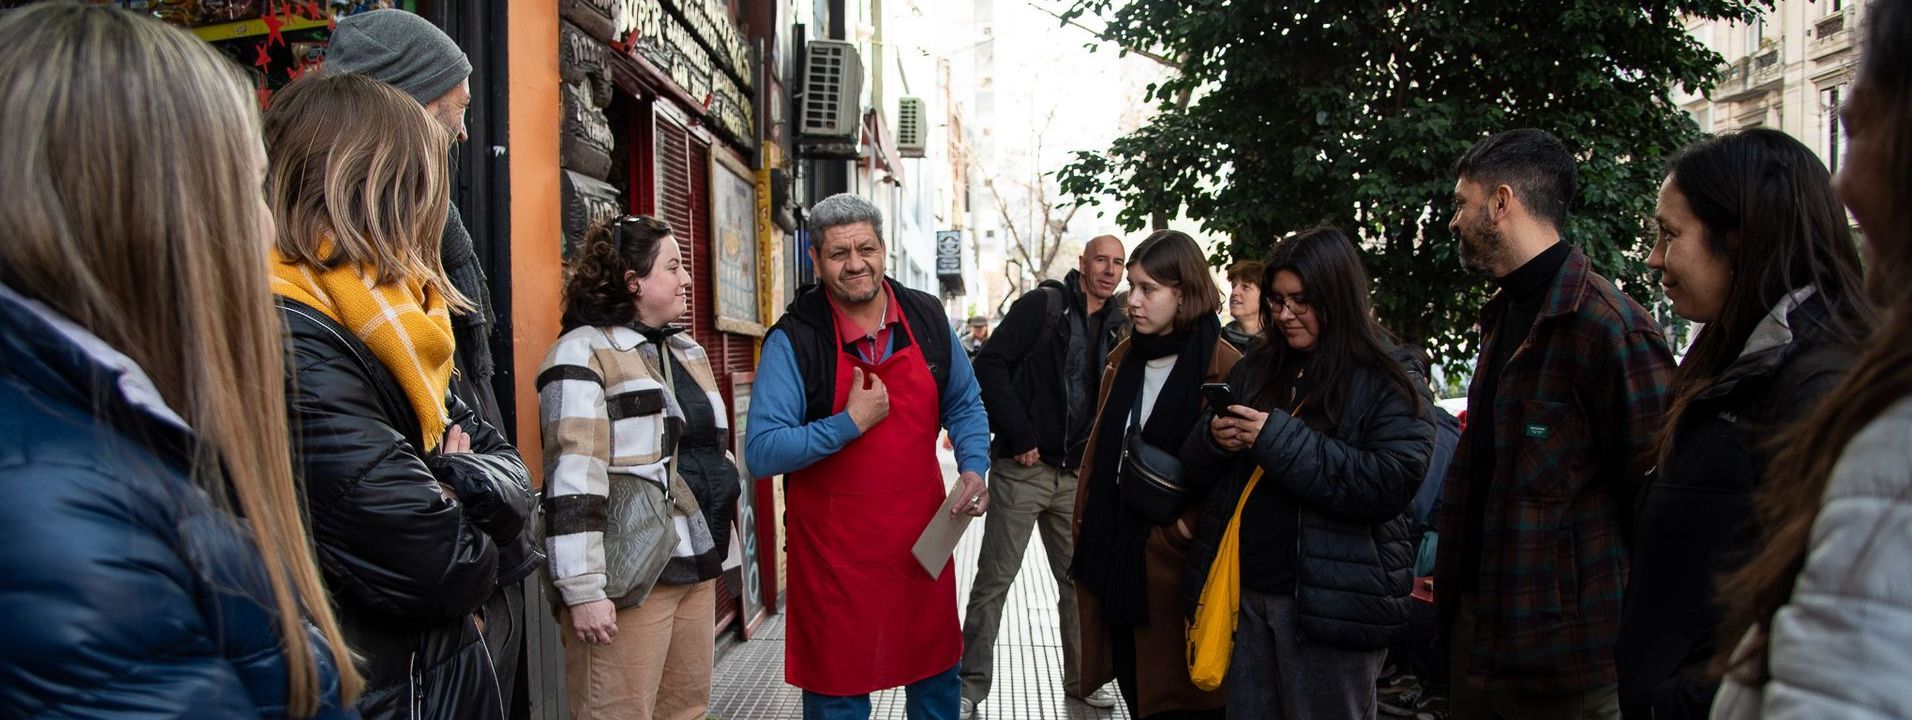 A group of tourists stands close to Beto, an empanada maker from San Telmo. He's wearing a red apron